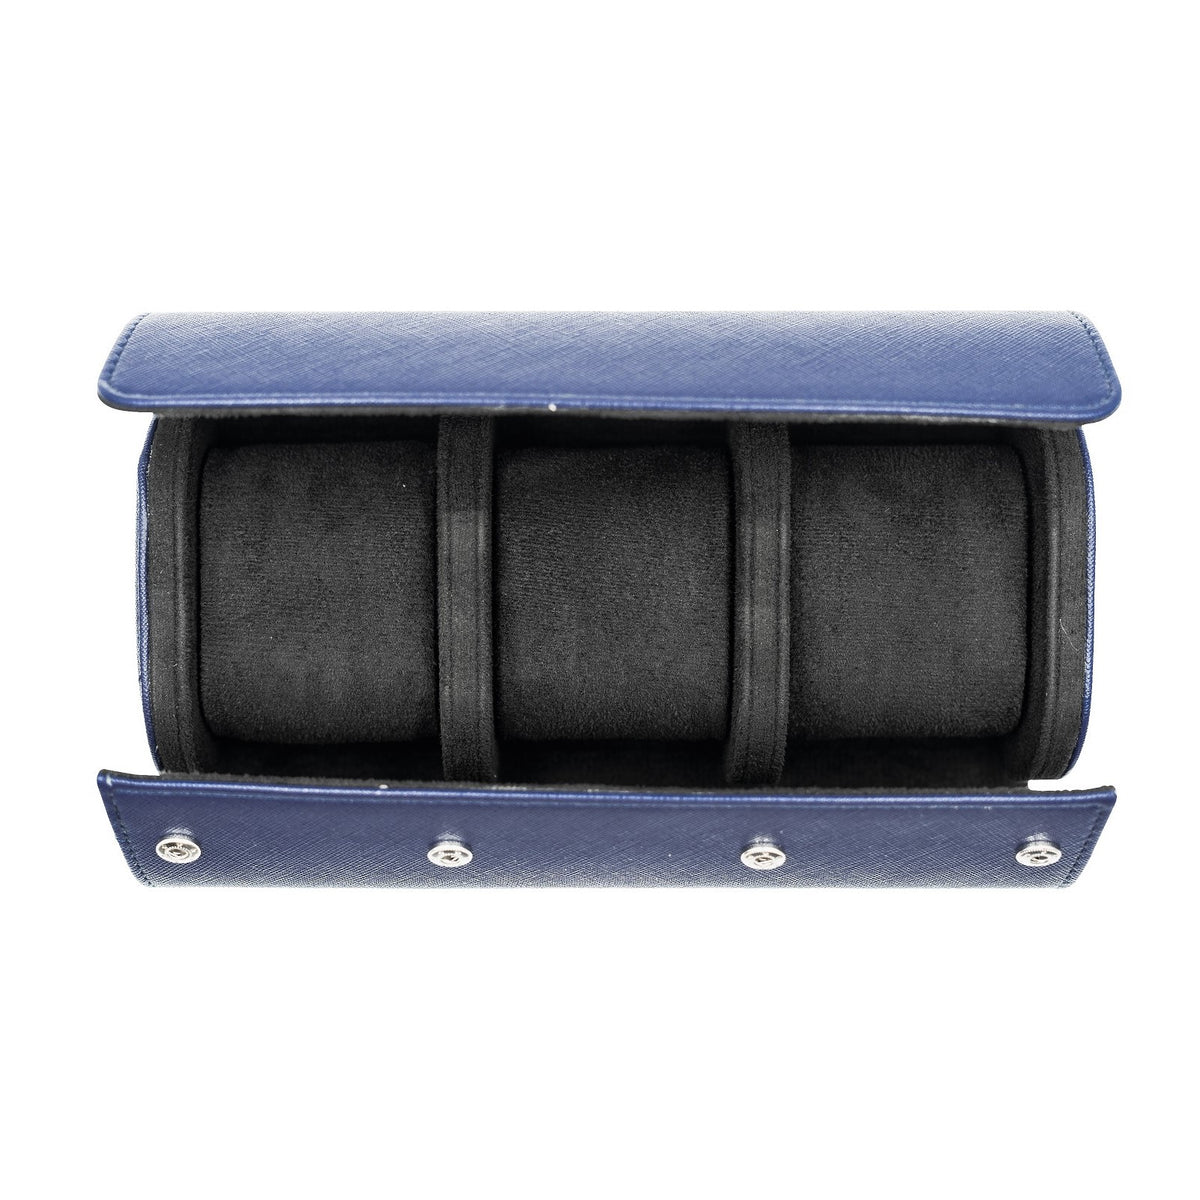 Saffiano Leather Watch Case in Navy (3 Slots)